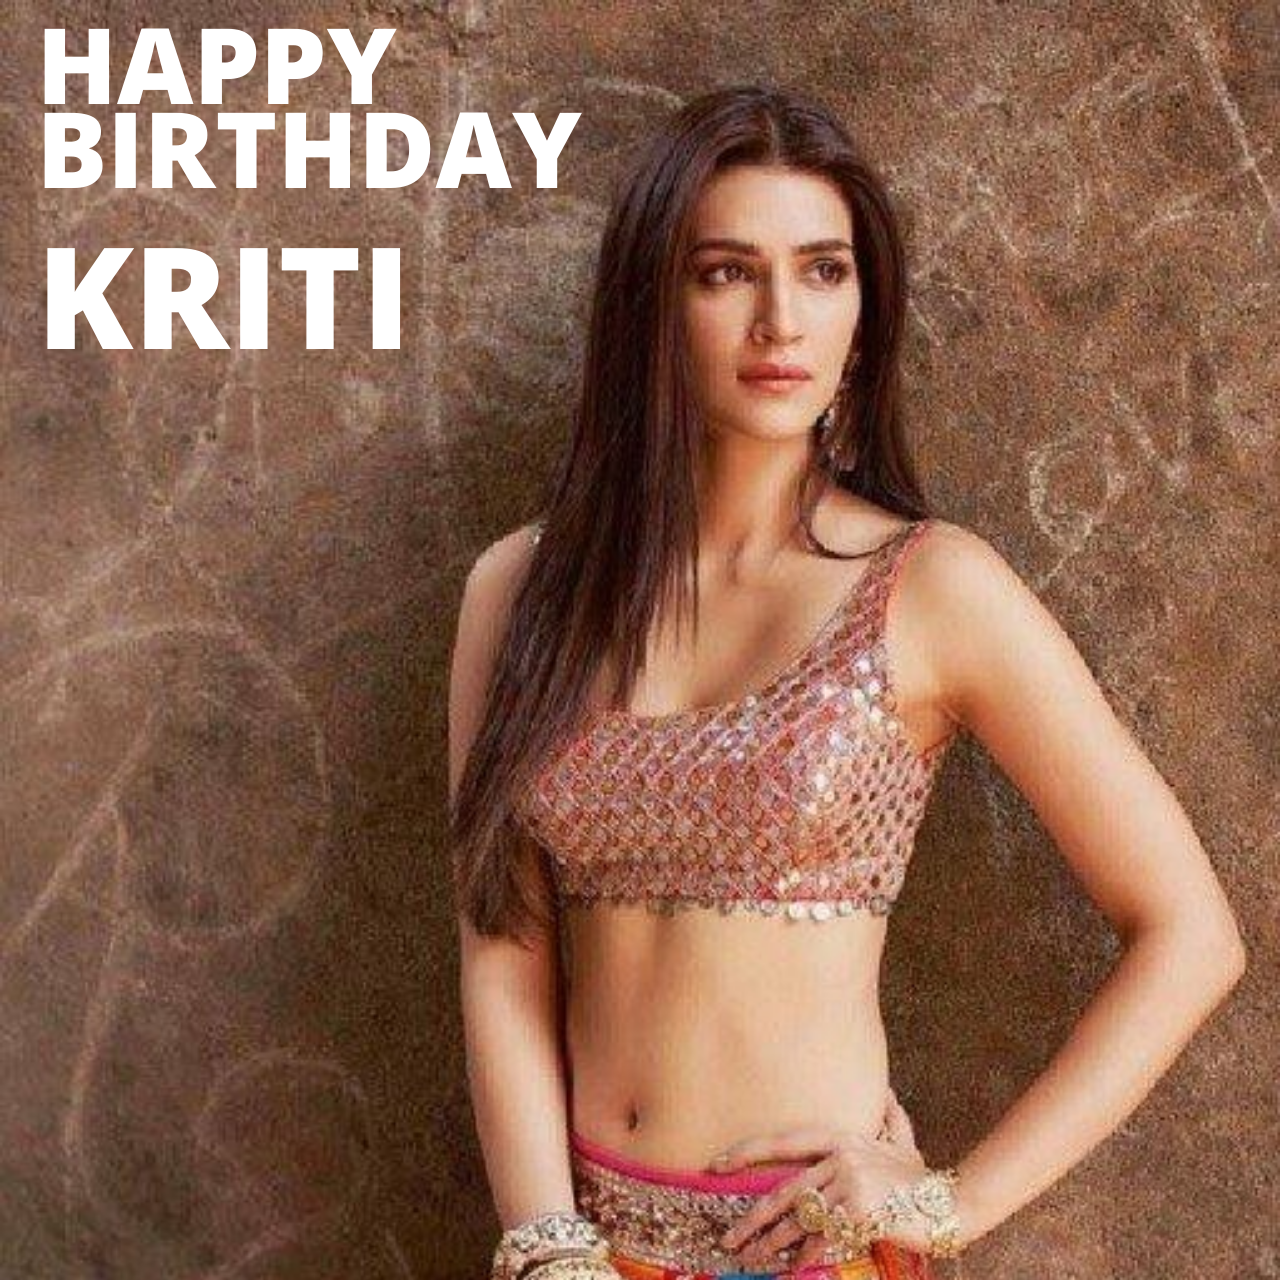 Happy Birthday Kriti Sanon: Wishes, Images, and WhatsApp Status Video to greet your favourite actress